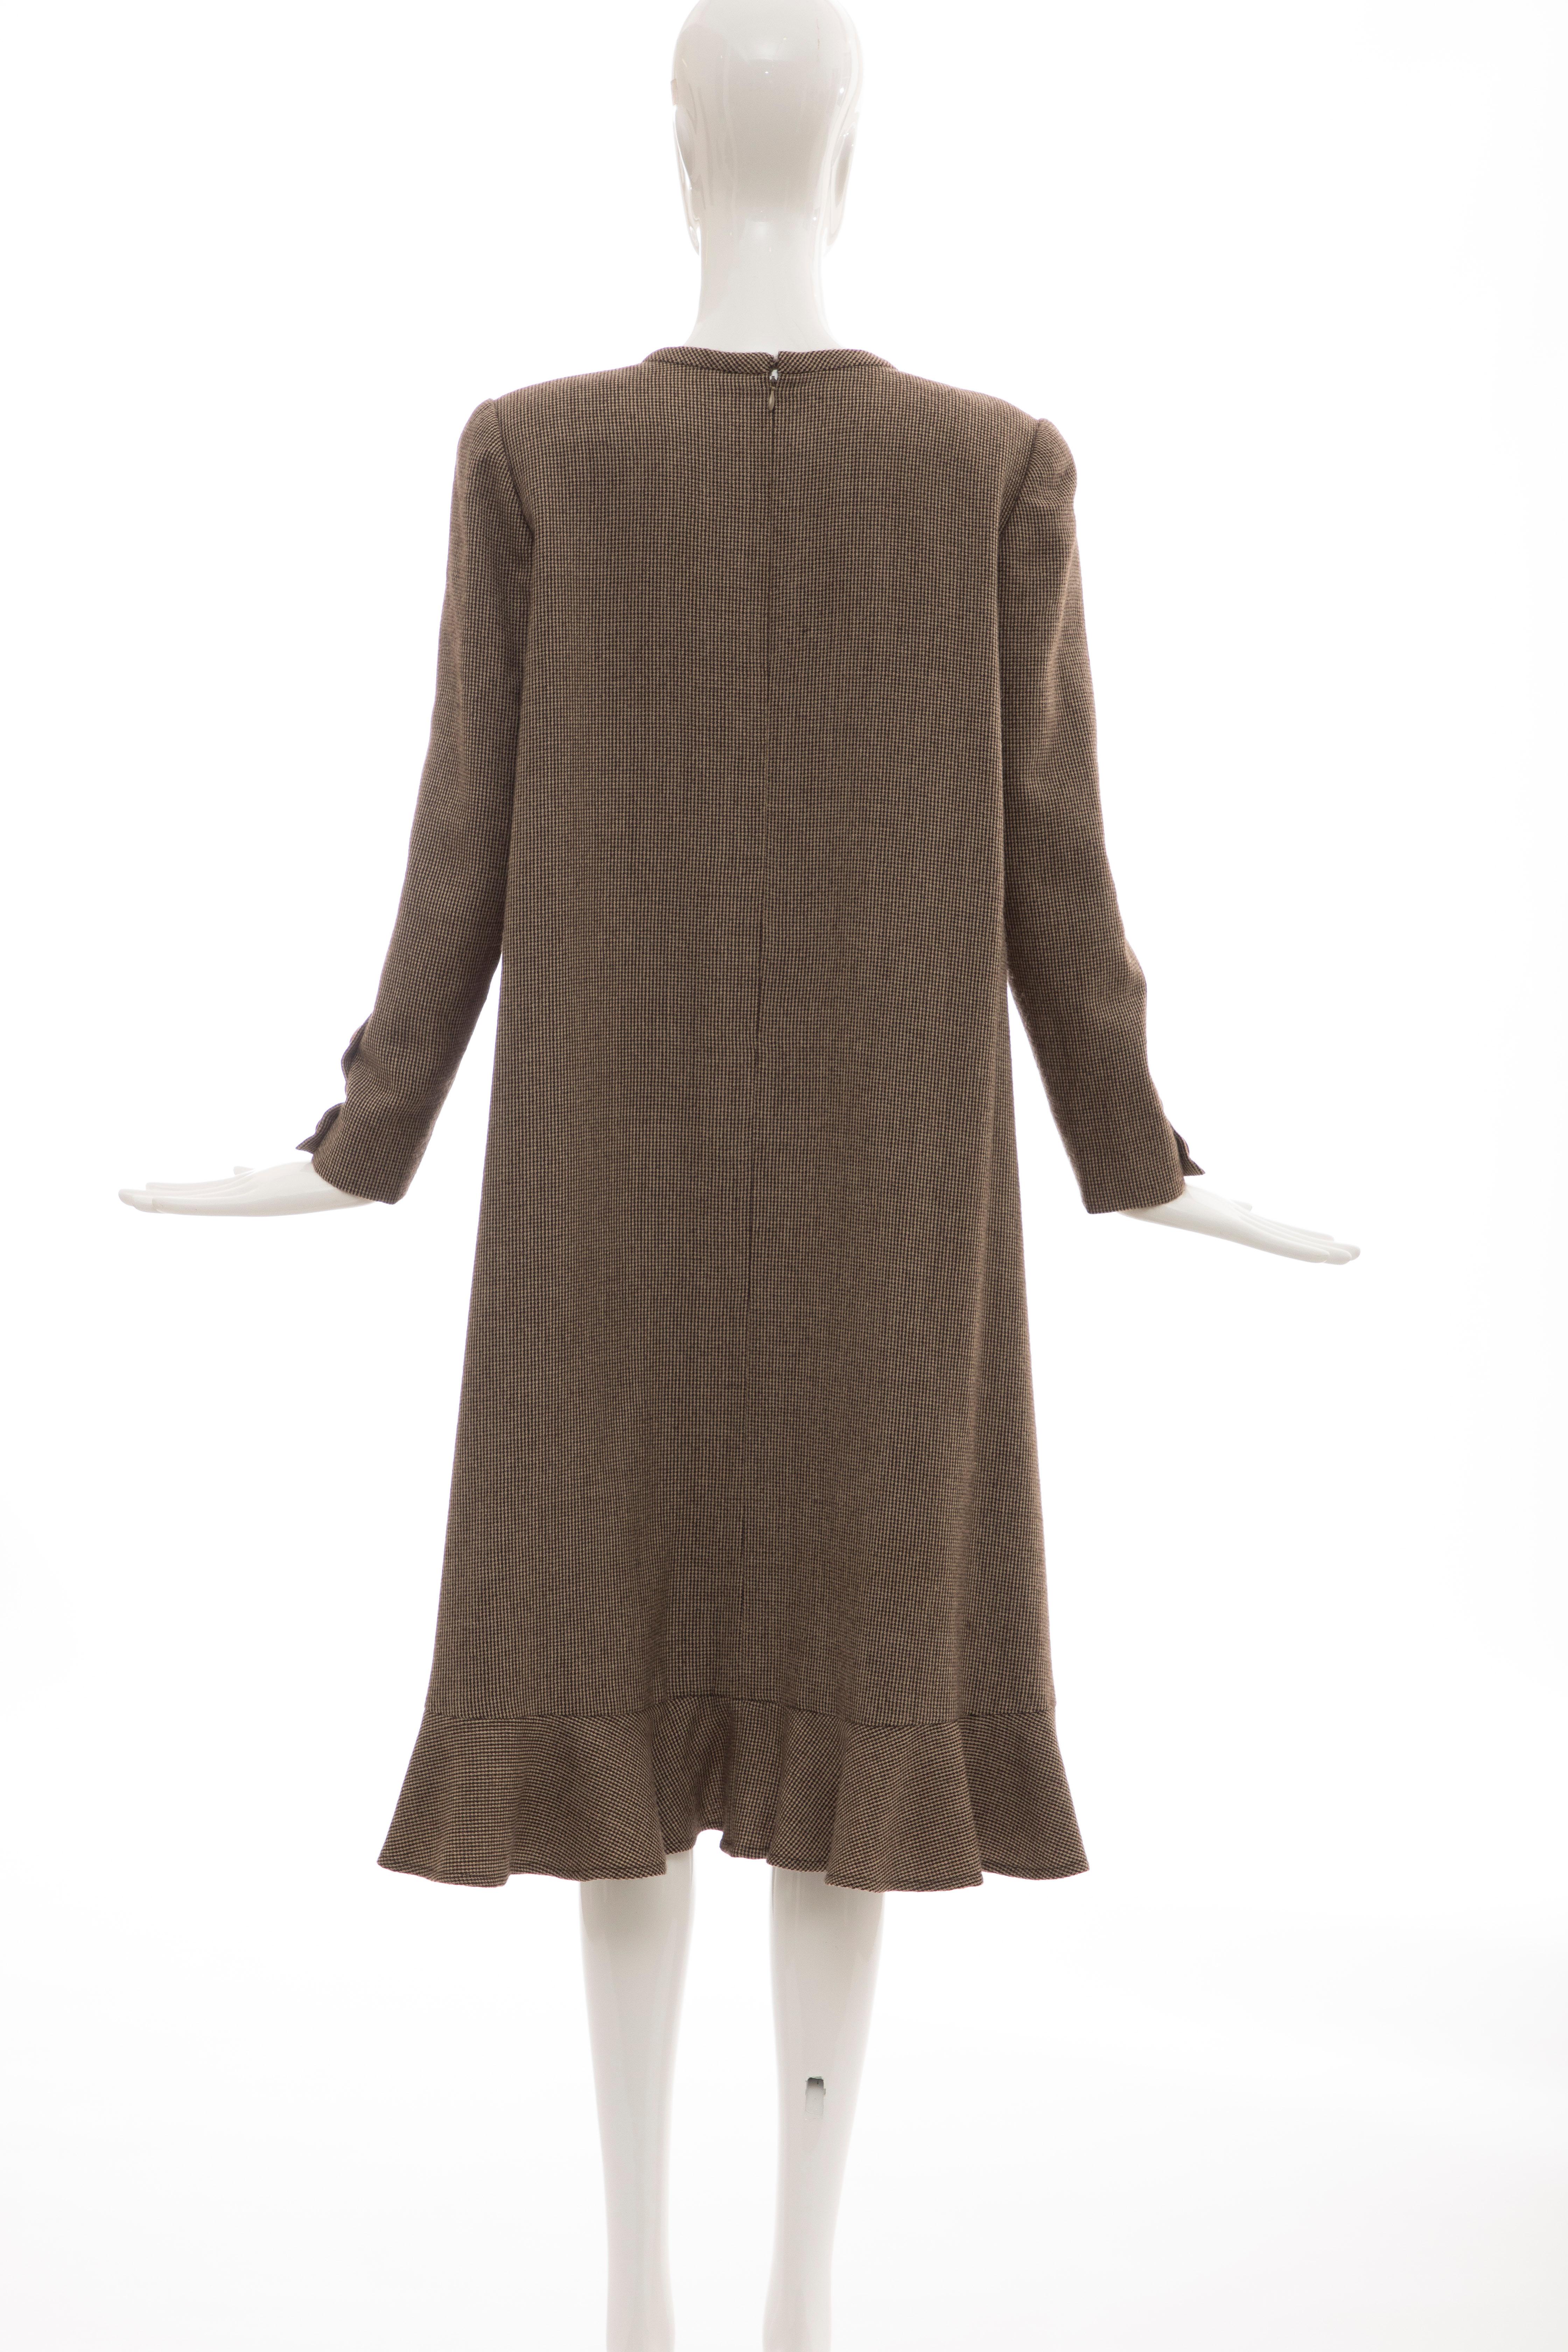 Bill Blass Brown Wool Tweed A Line Button Front Dress, Circa: 1970's For Sale 5